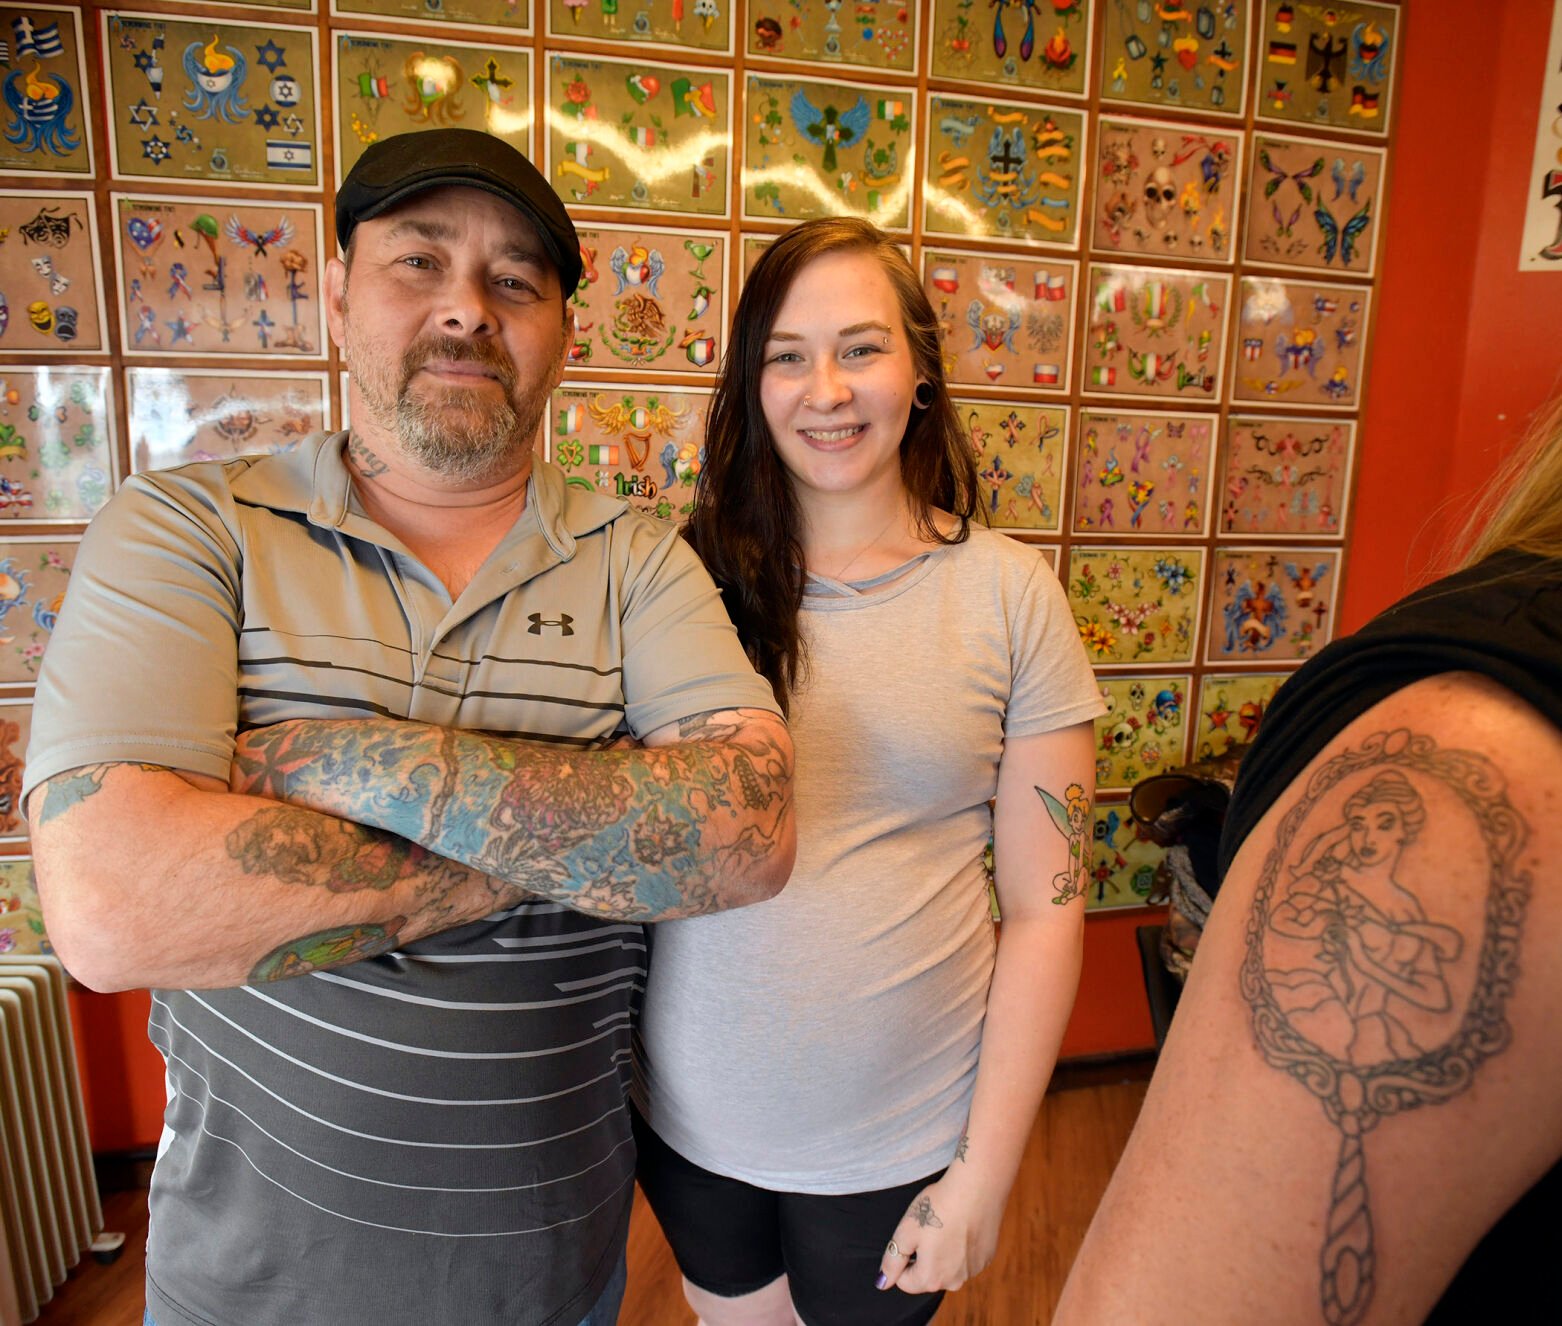 Man surprises girlfriend with marriageproposal tattoo he tricks her into  inking on him  ABC News